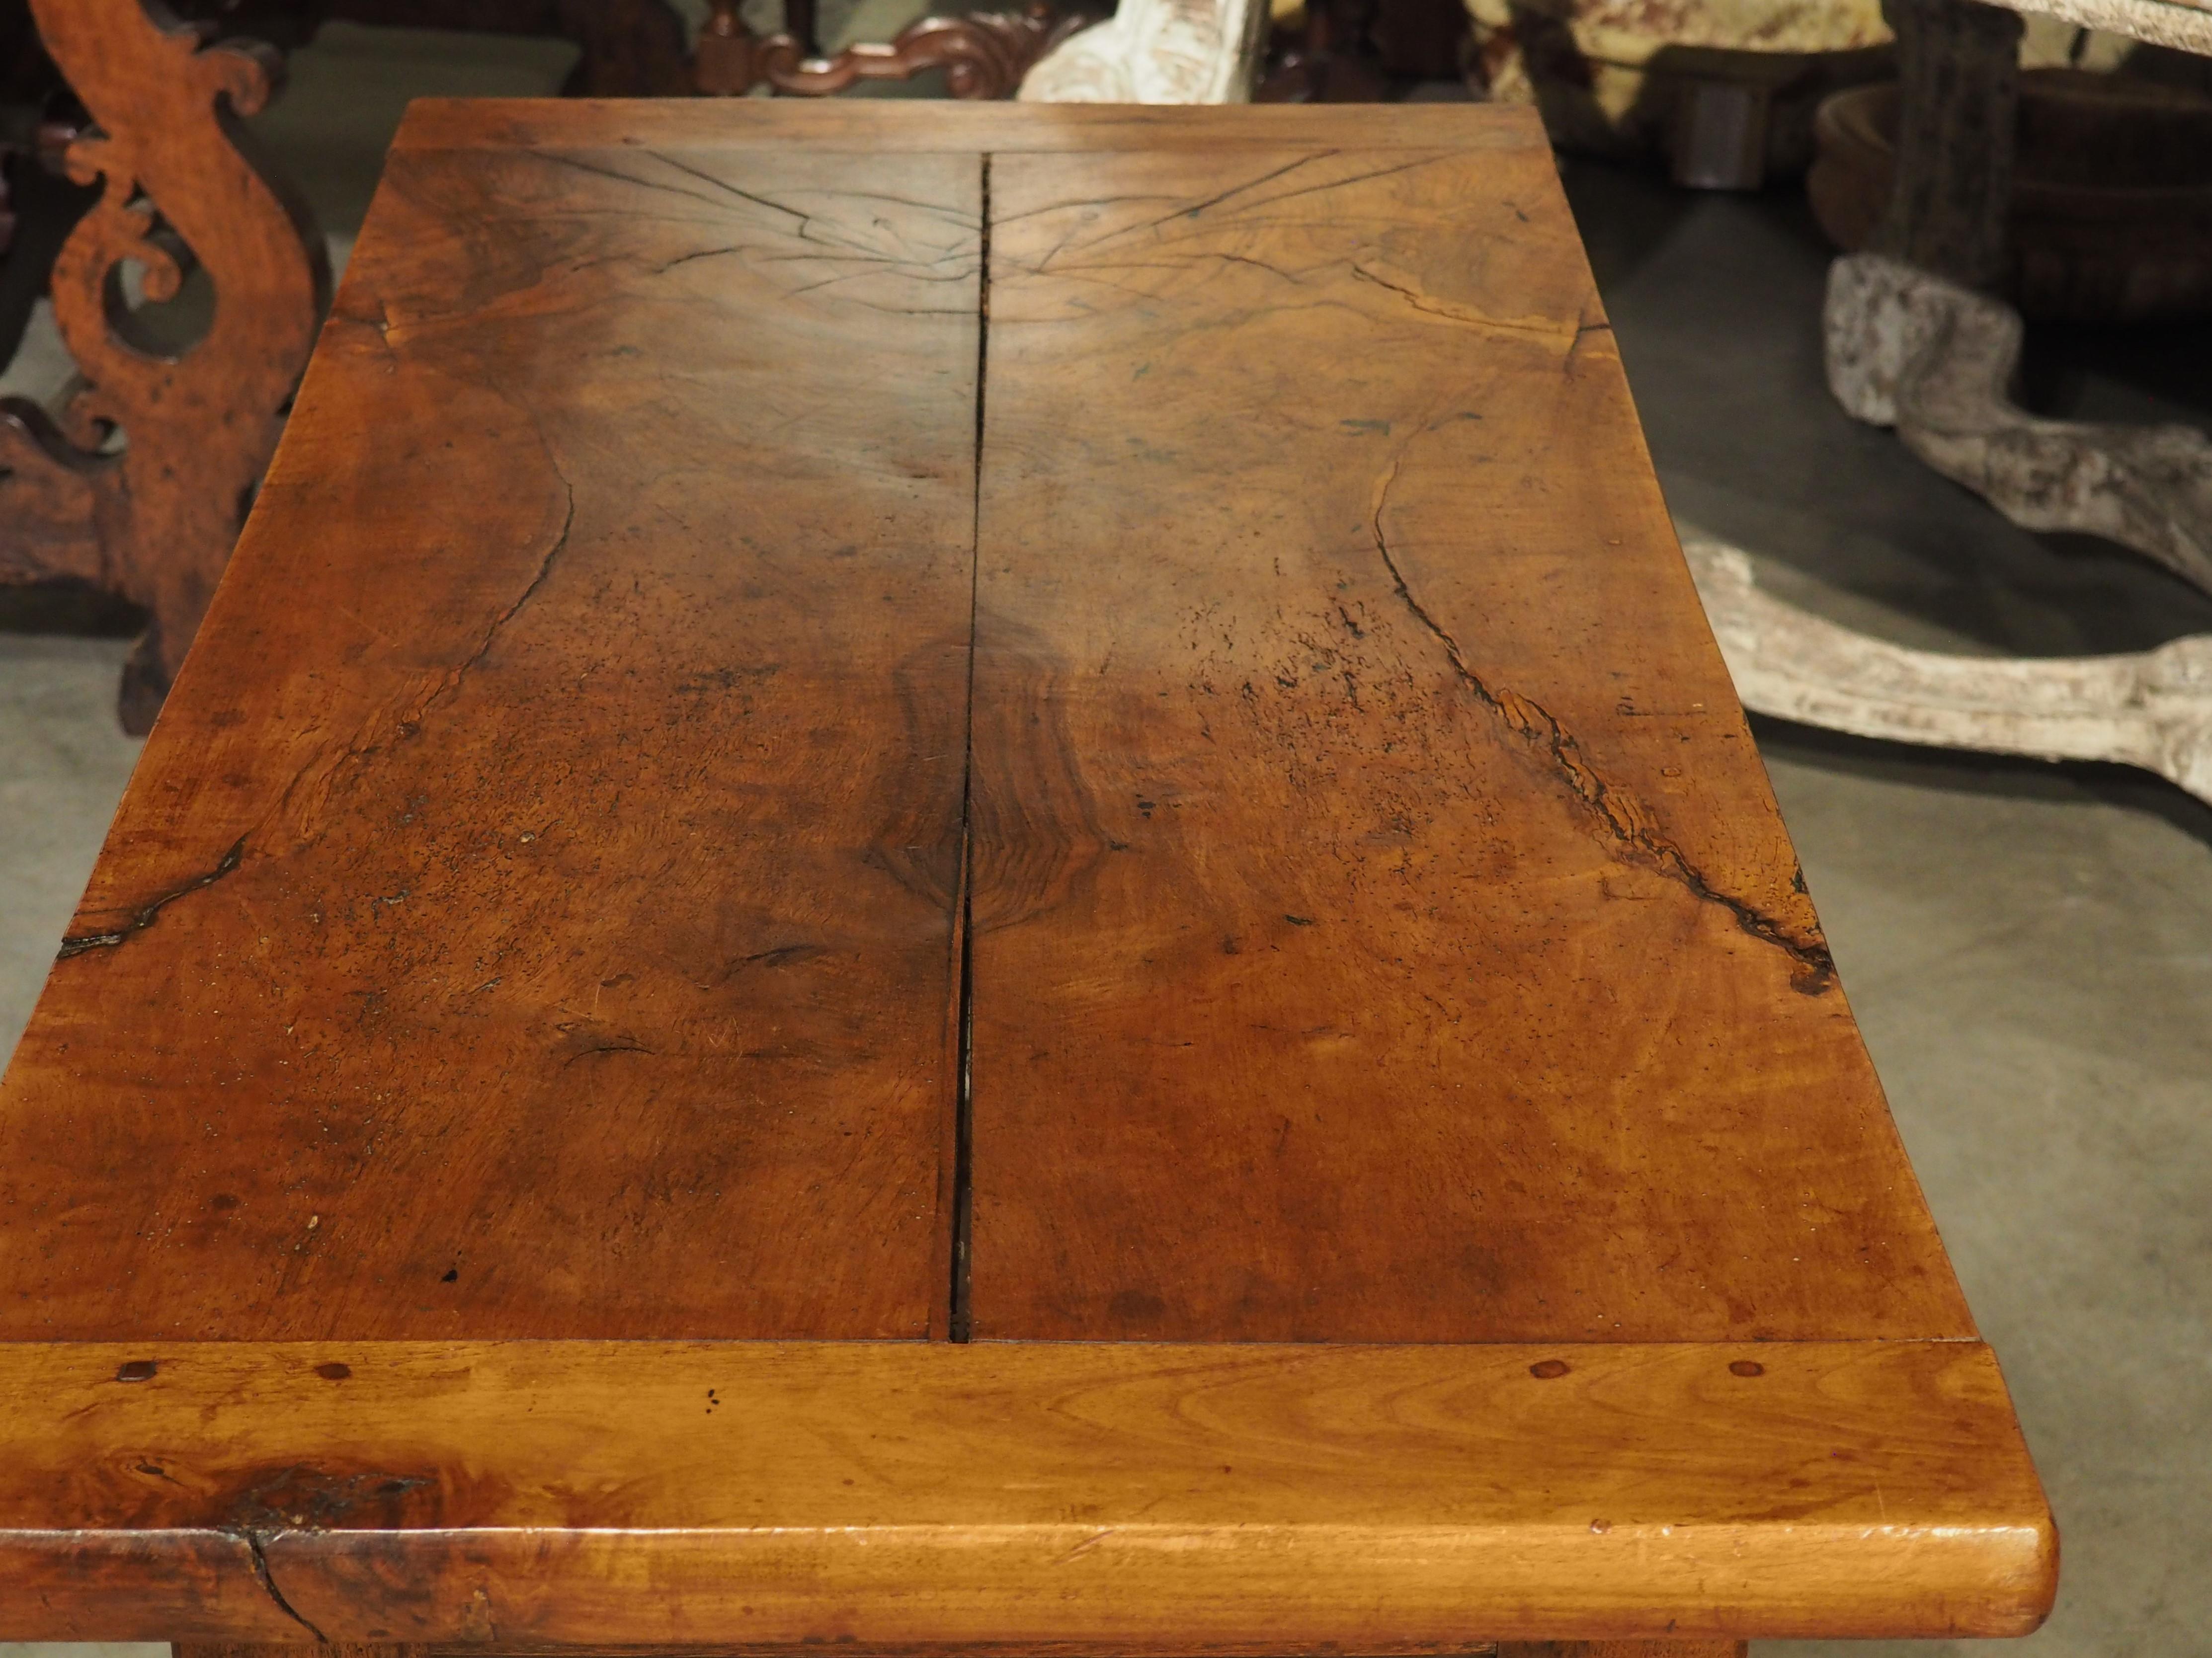 Hand-Carved 19th Century Single Burl Walnut Plank Table from Normandy, France For Sale